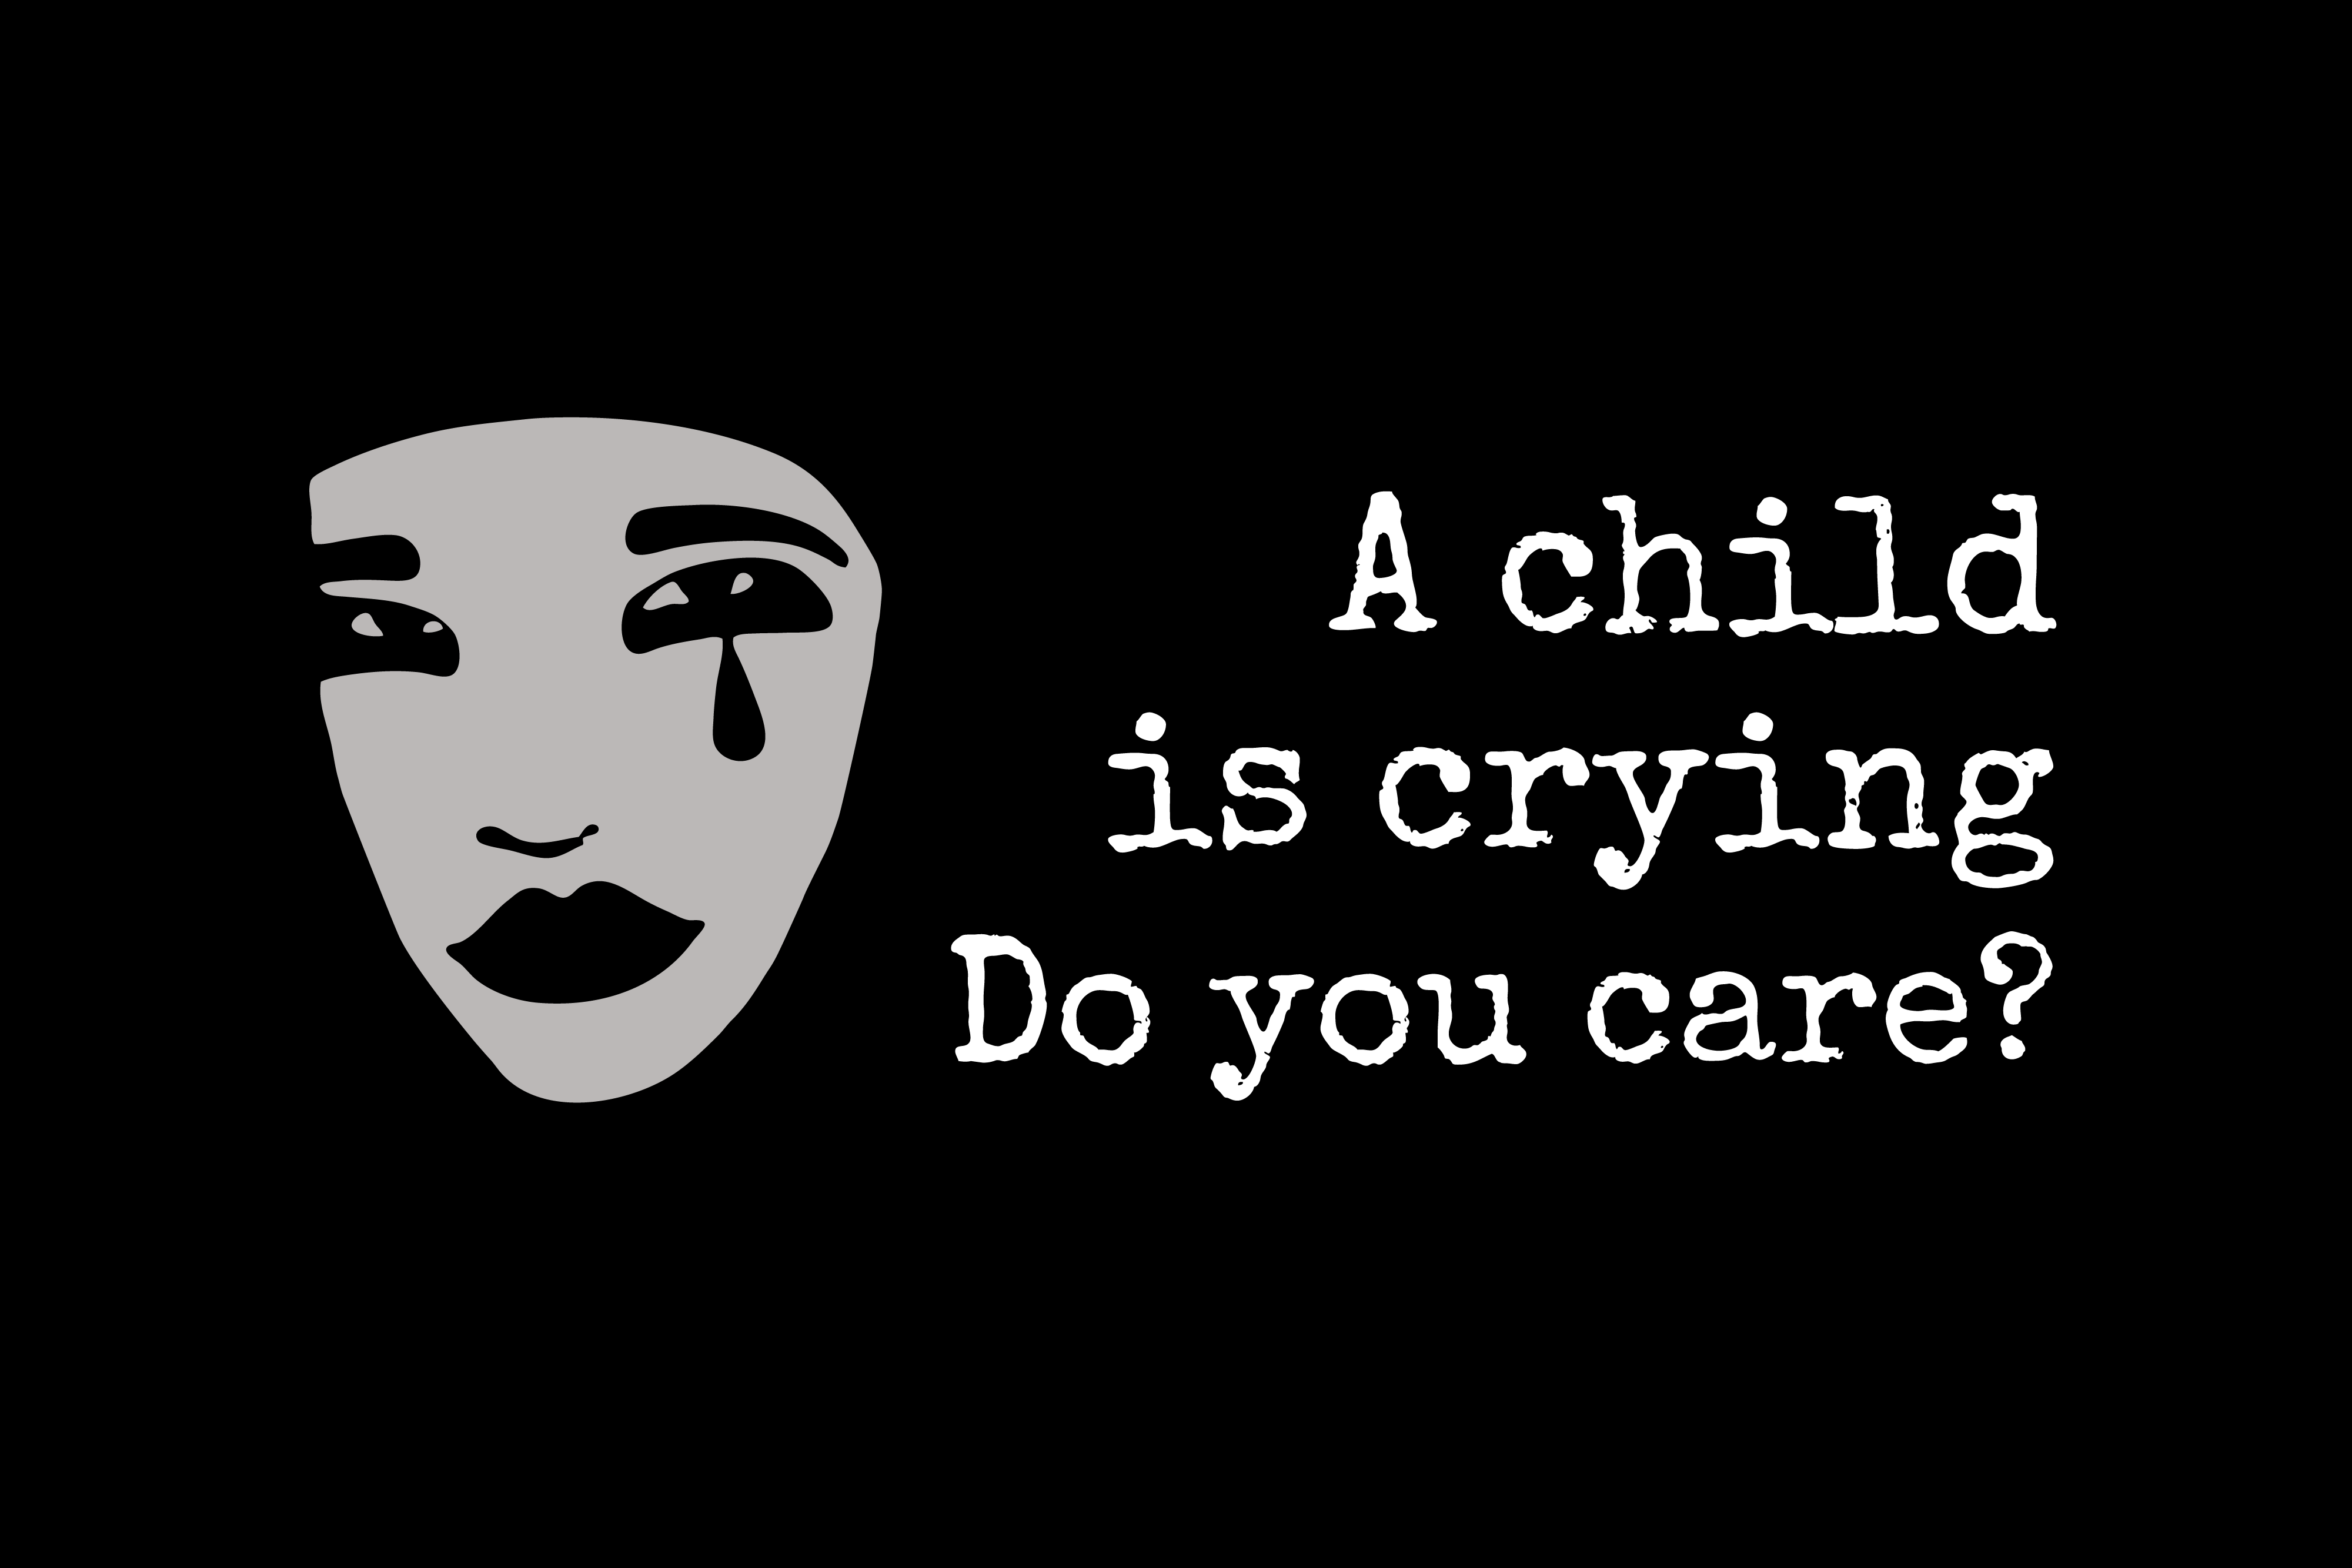 A child is crying